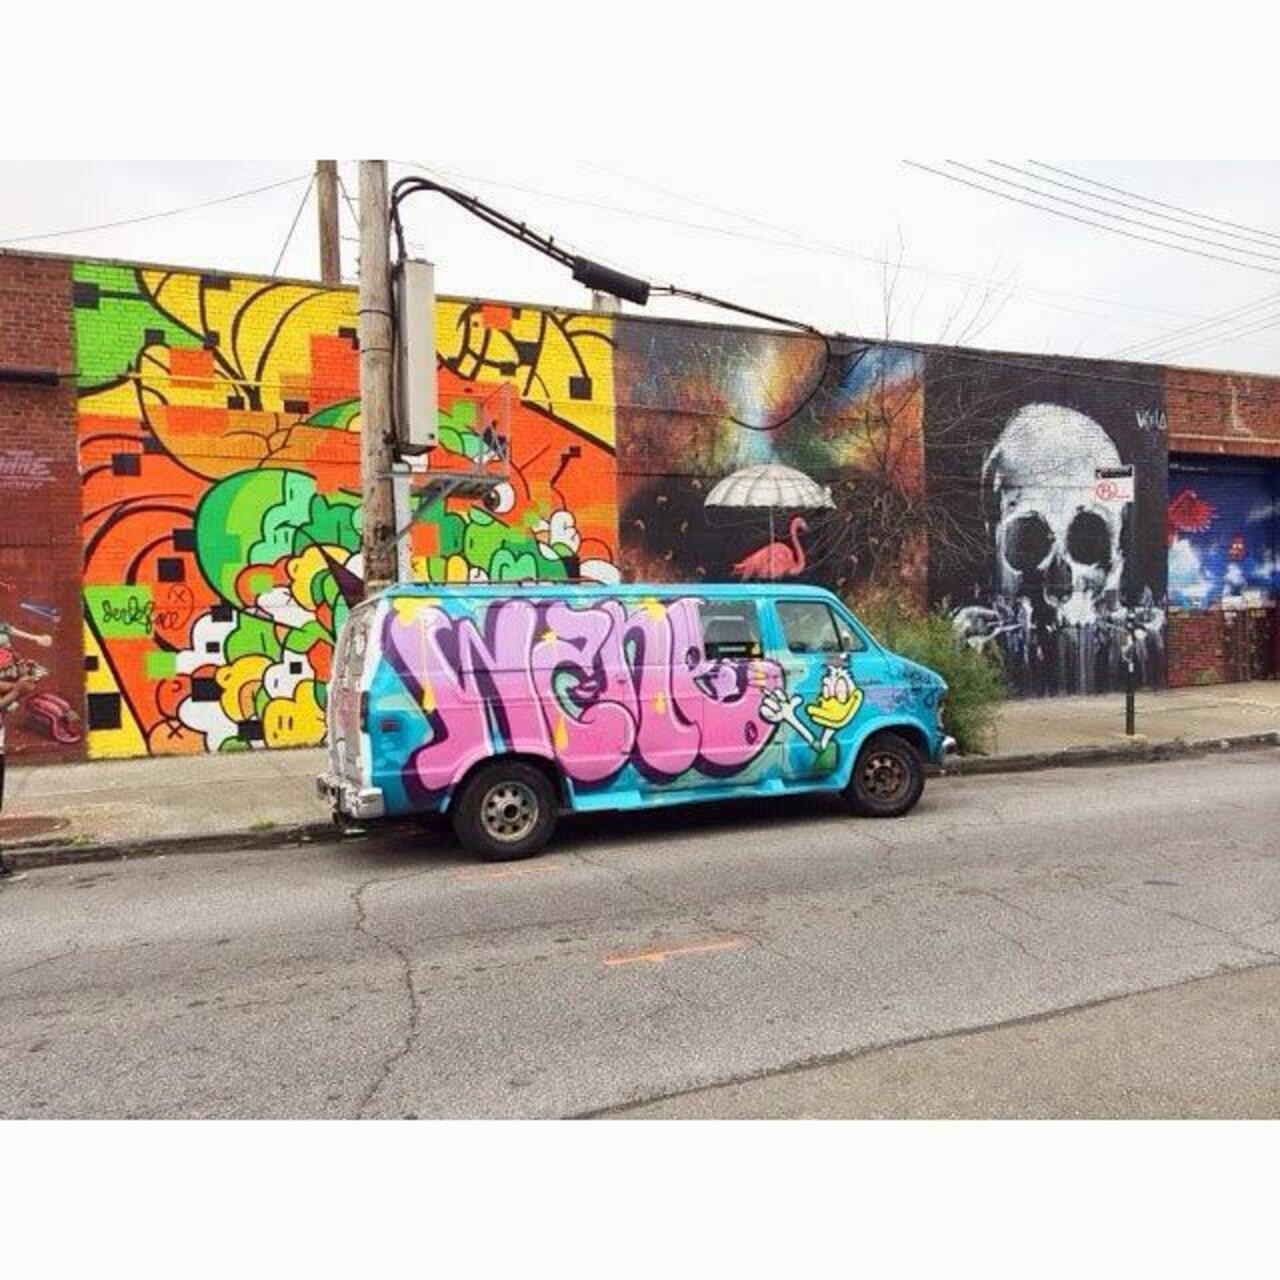 I saw this van in #brooklyn . Does anyone know of the #artist ? #streetart #graffiti http://t.co/rRwSphcf6M